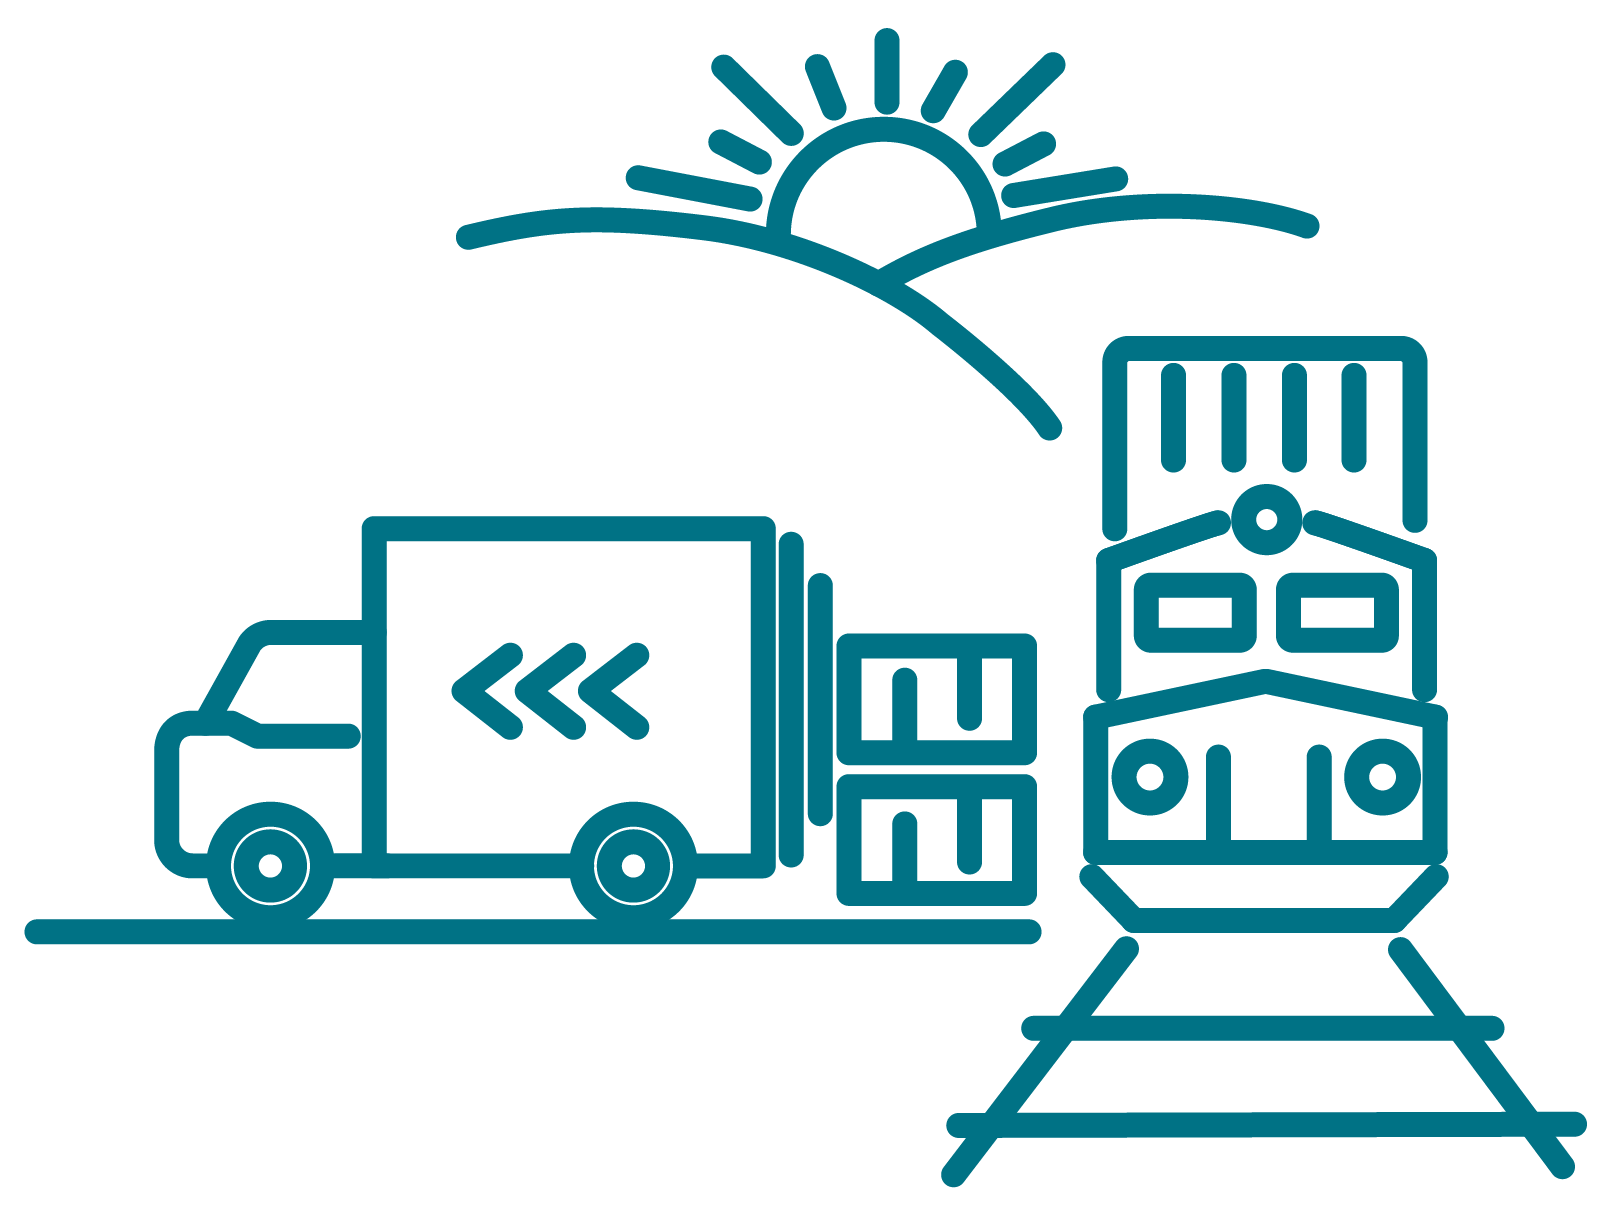 Icon depicting freight availability